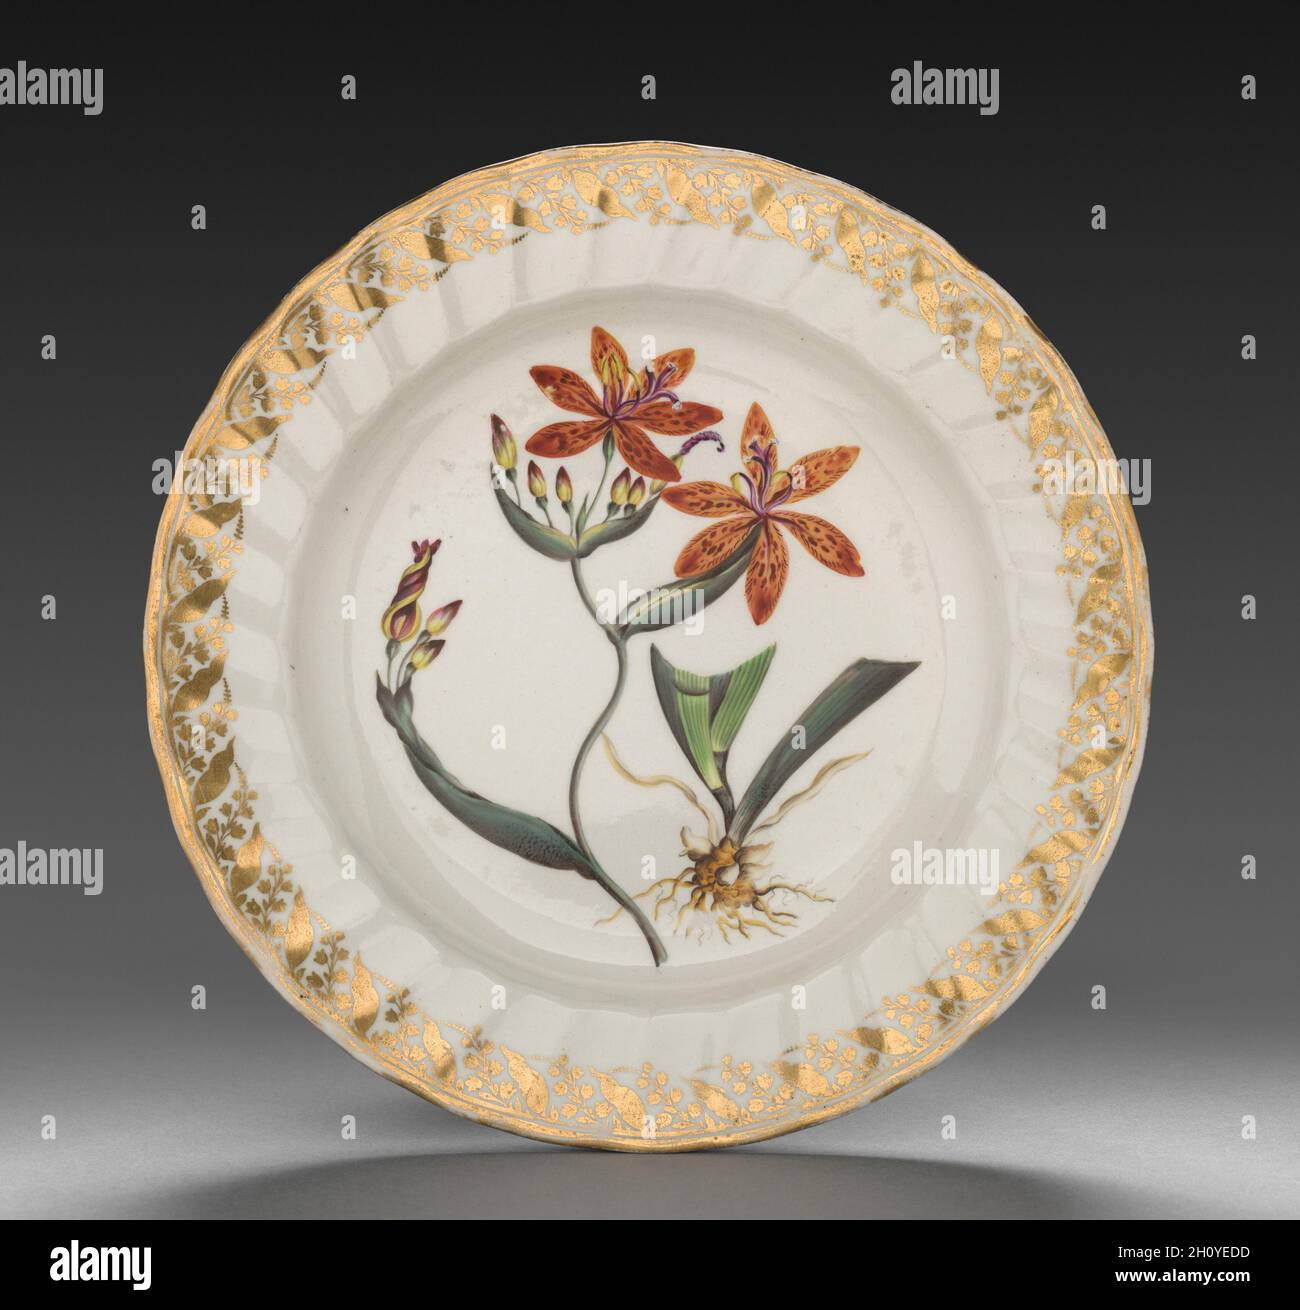 Plate from Dessert Service: Chinese Ixia, c. 1800. Derby (Crown Derby Period) (British). Porcelain; diameter: 23.7 cm (9 5/16 in.); overall: 3.2 cm (1 1/4 in.).  Each dish is decorated with recognizable plants, the names of which are inscribed on the base in both Latin and English. Identifying the blossoms only became customary in the late 18th century when a single piece of porcelain was decorated with one species, and flowers were represented along with leaves, stems, seed pods, and roots. All of this reflects Carolus Linnaeus’s recent invention of a scientific method to categorize all known Stock Photo